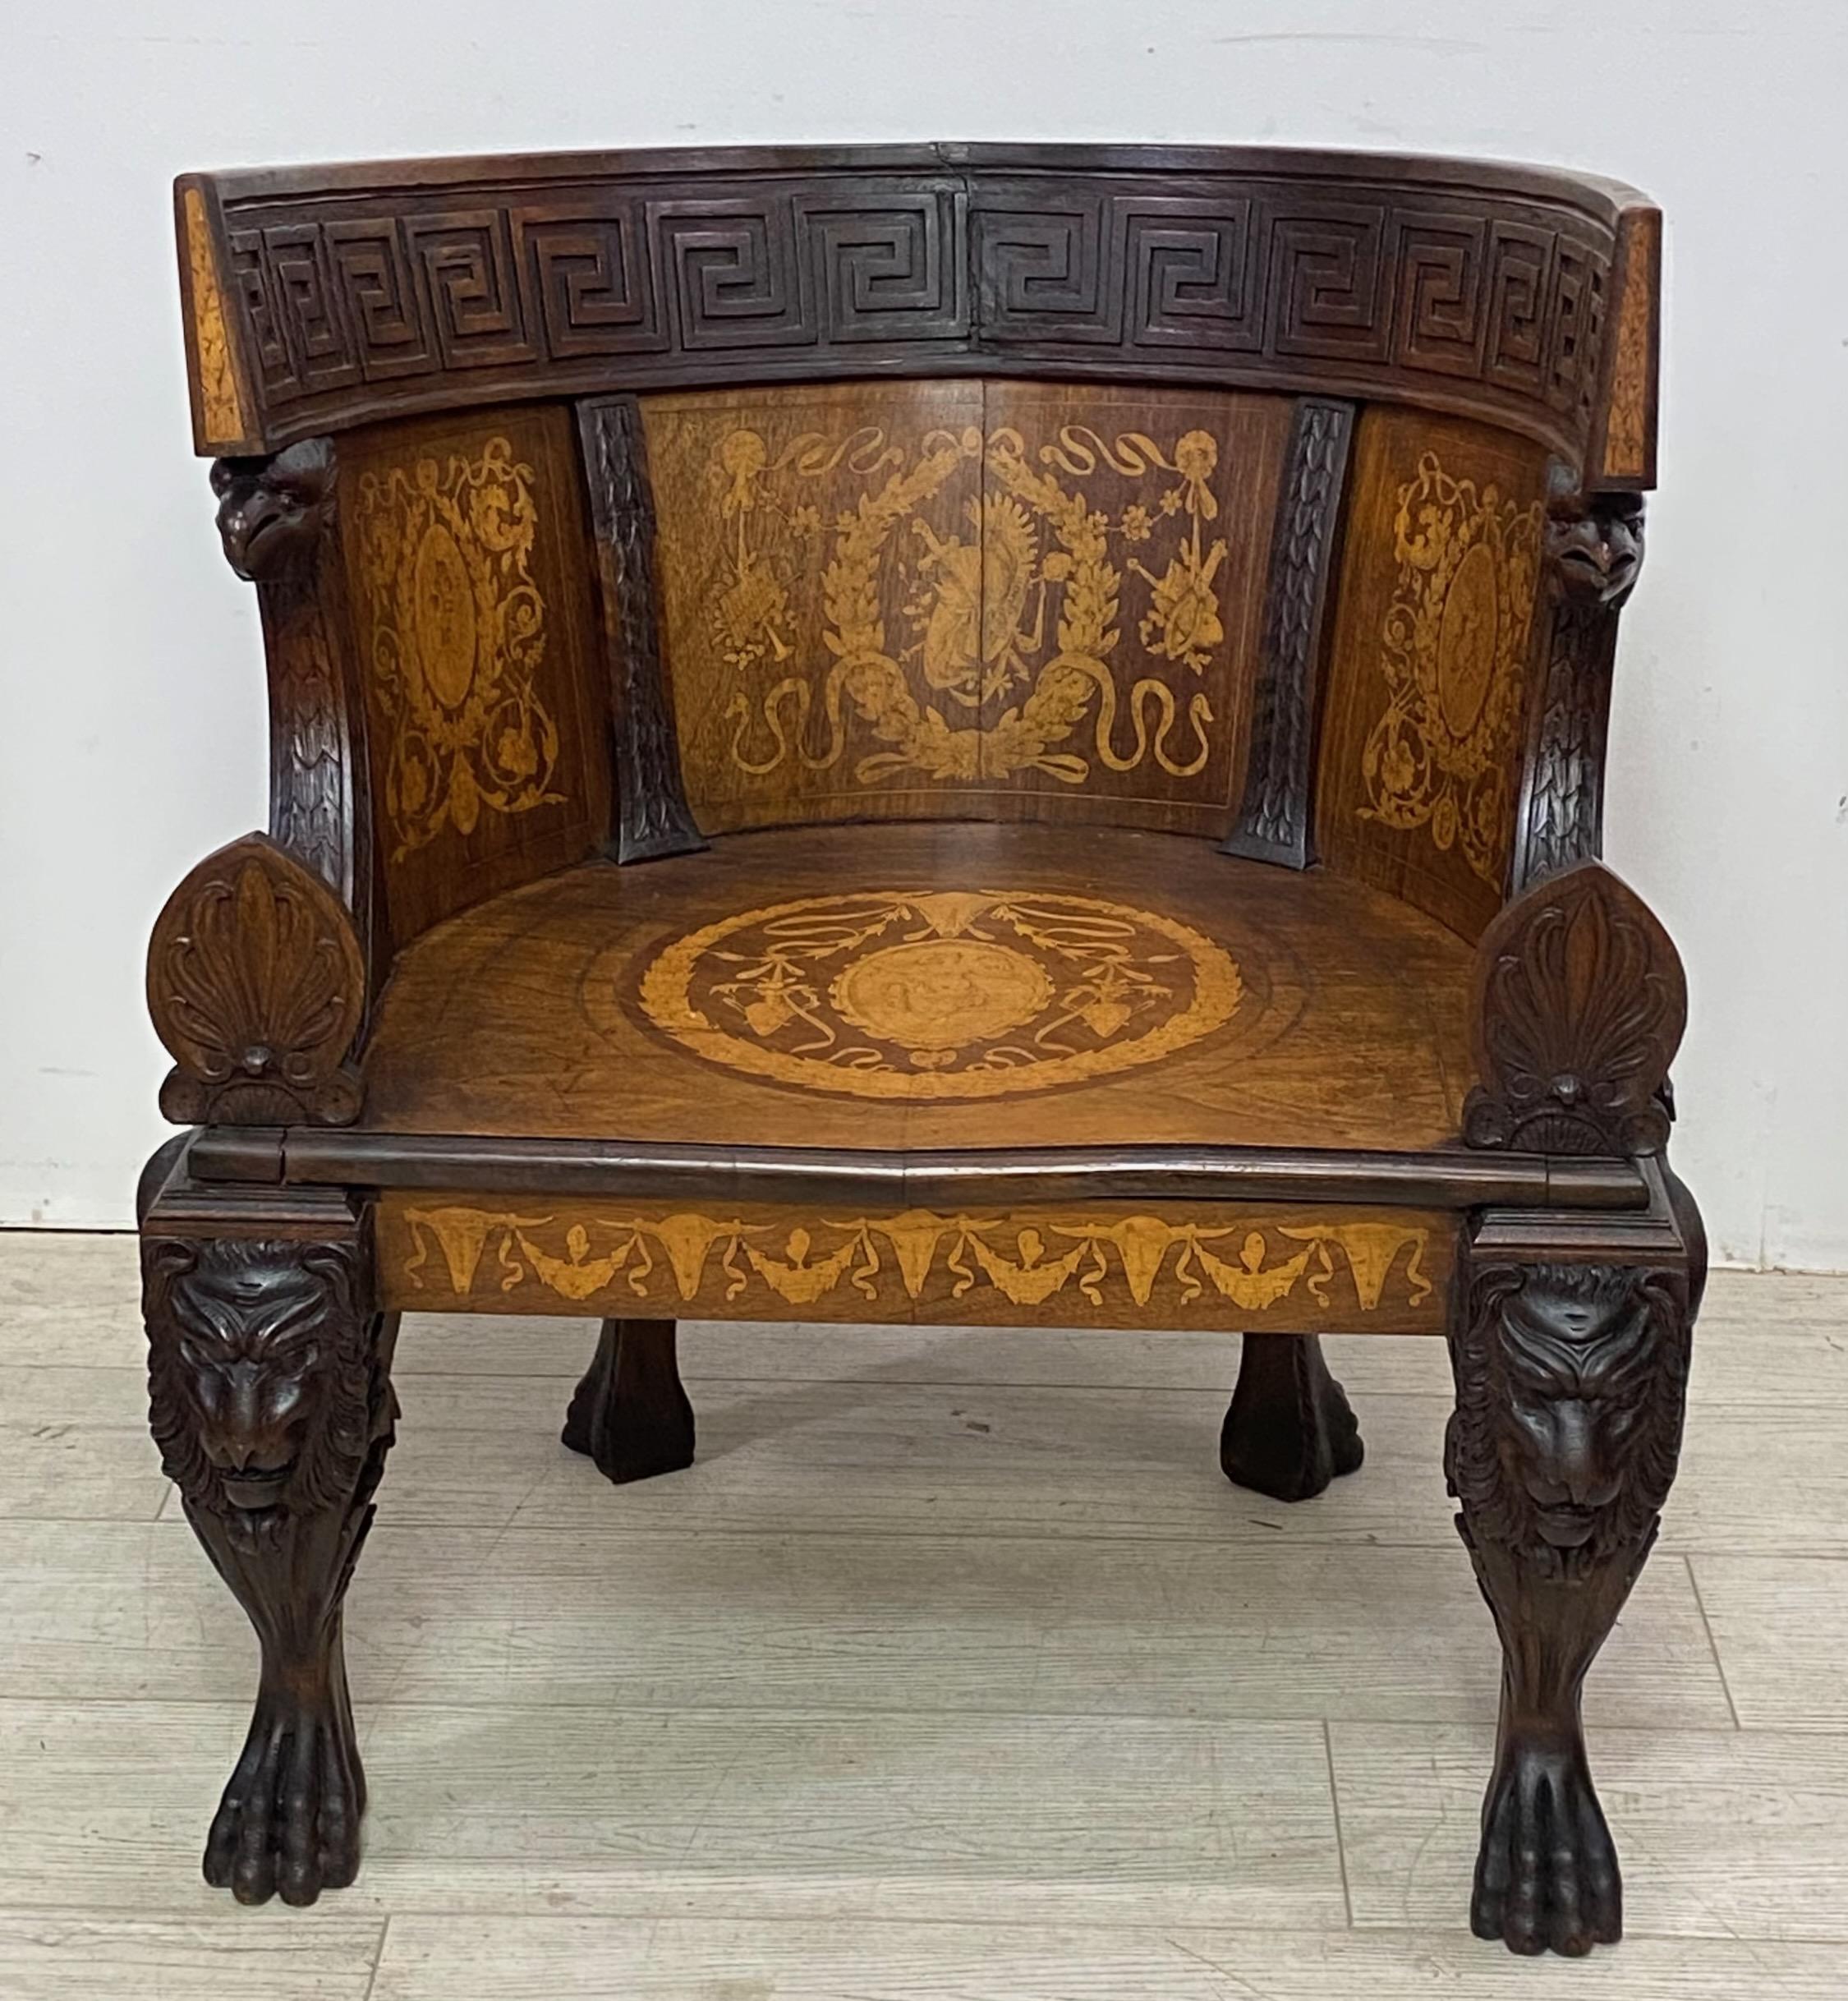 A highly unusual Imperial Revival style Grand Tour period armchair.
Black walnut with walnut and satinwood inlay and pen work detail. Beautifully carved legs and paw feet, and having a Greek Key design along the back. 
In 52 years of being an